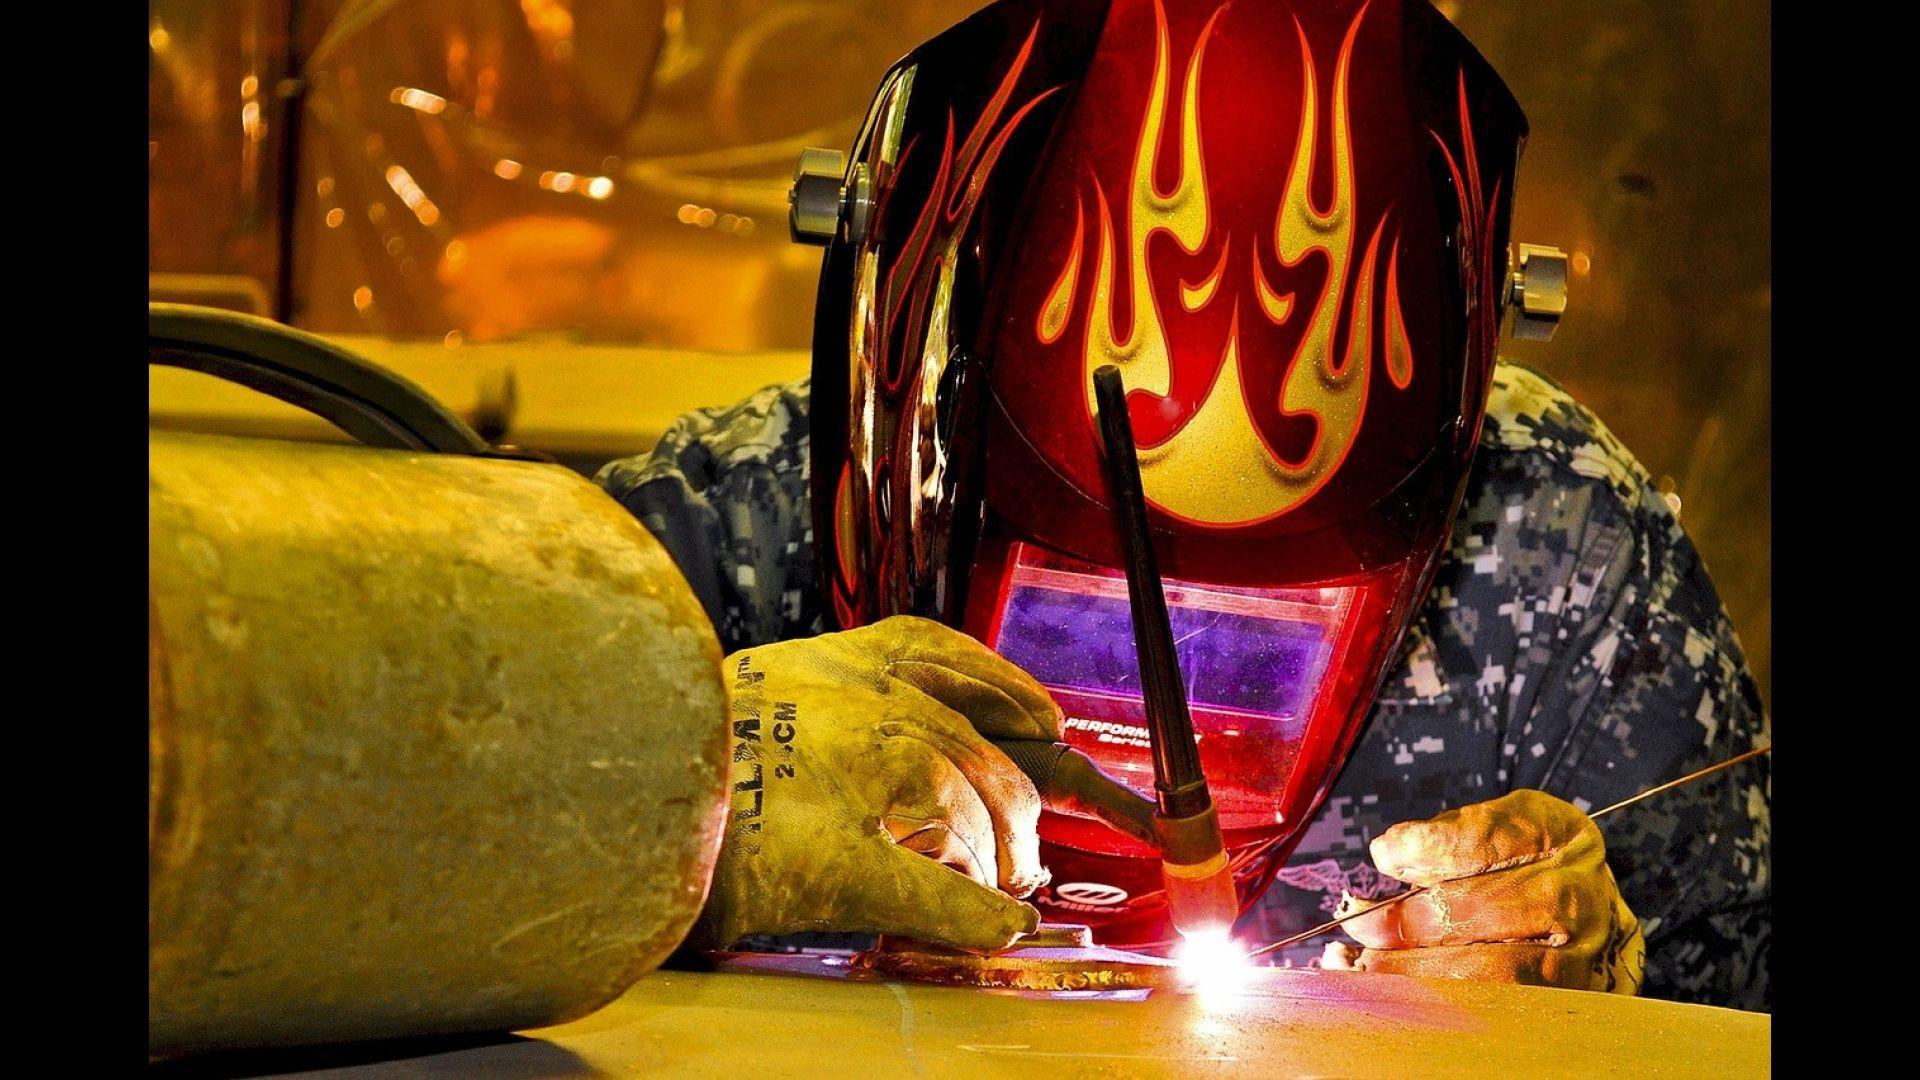 WELDING. CONSTRUCTION WALLPAPER for Android